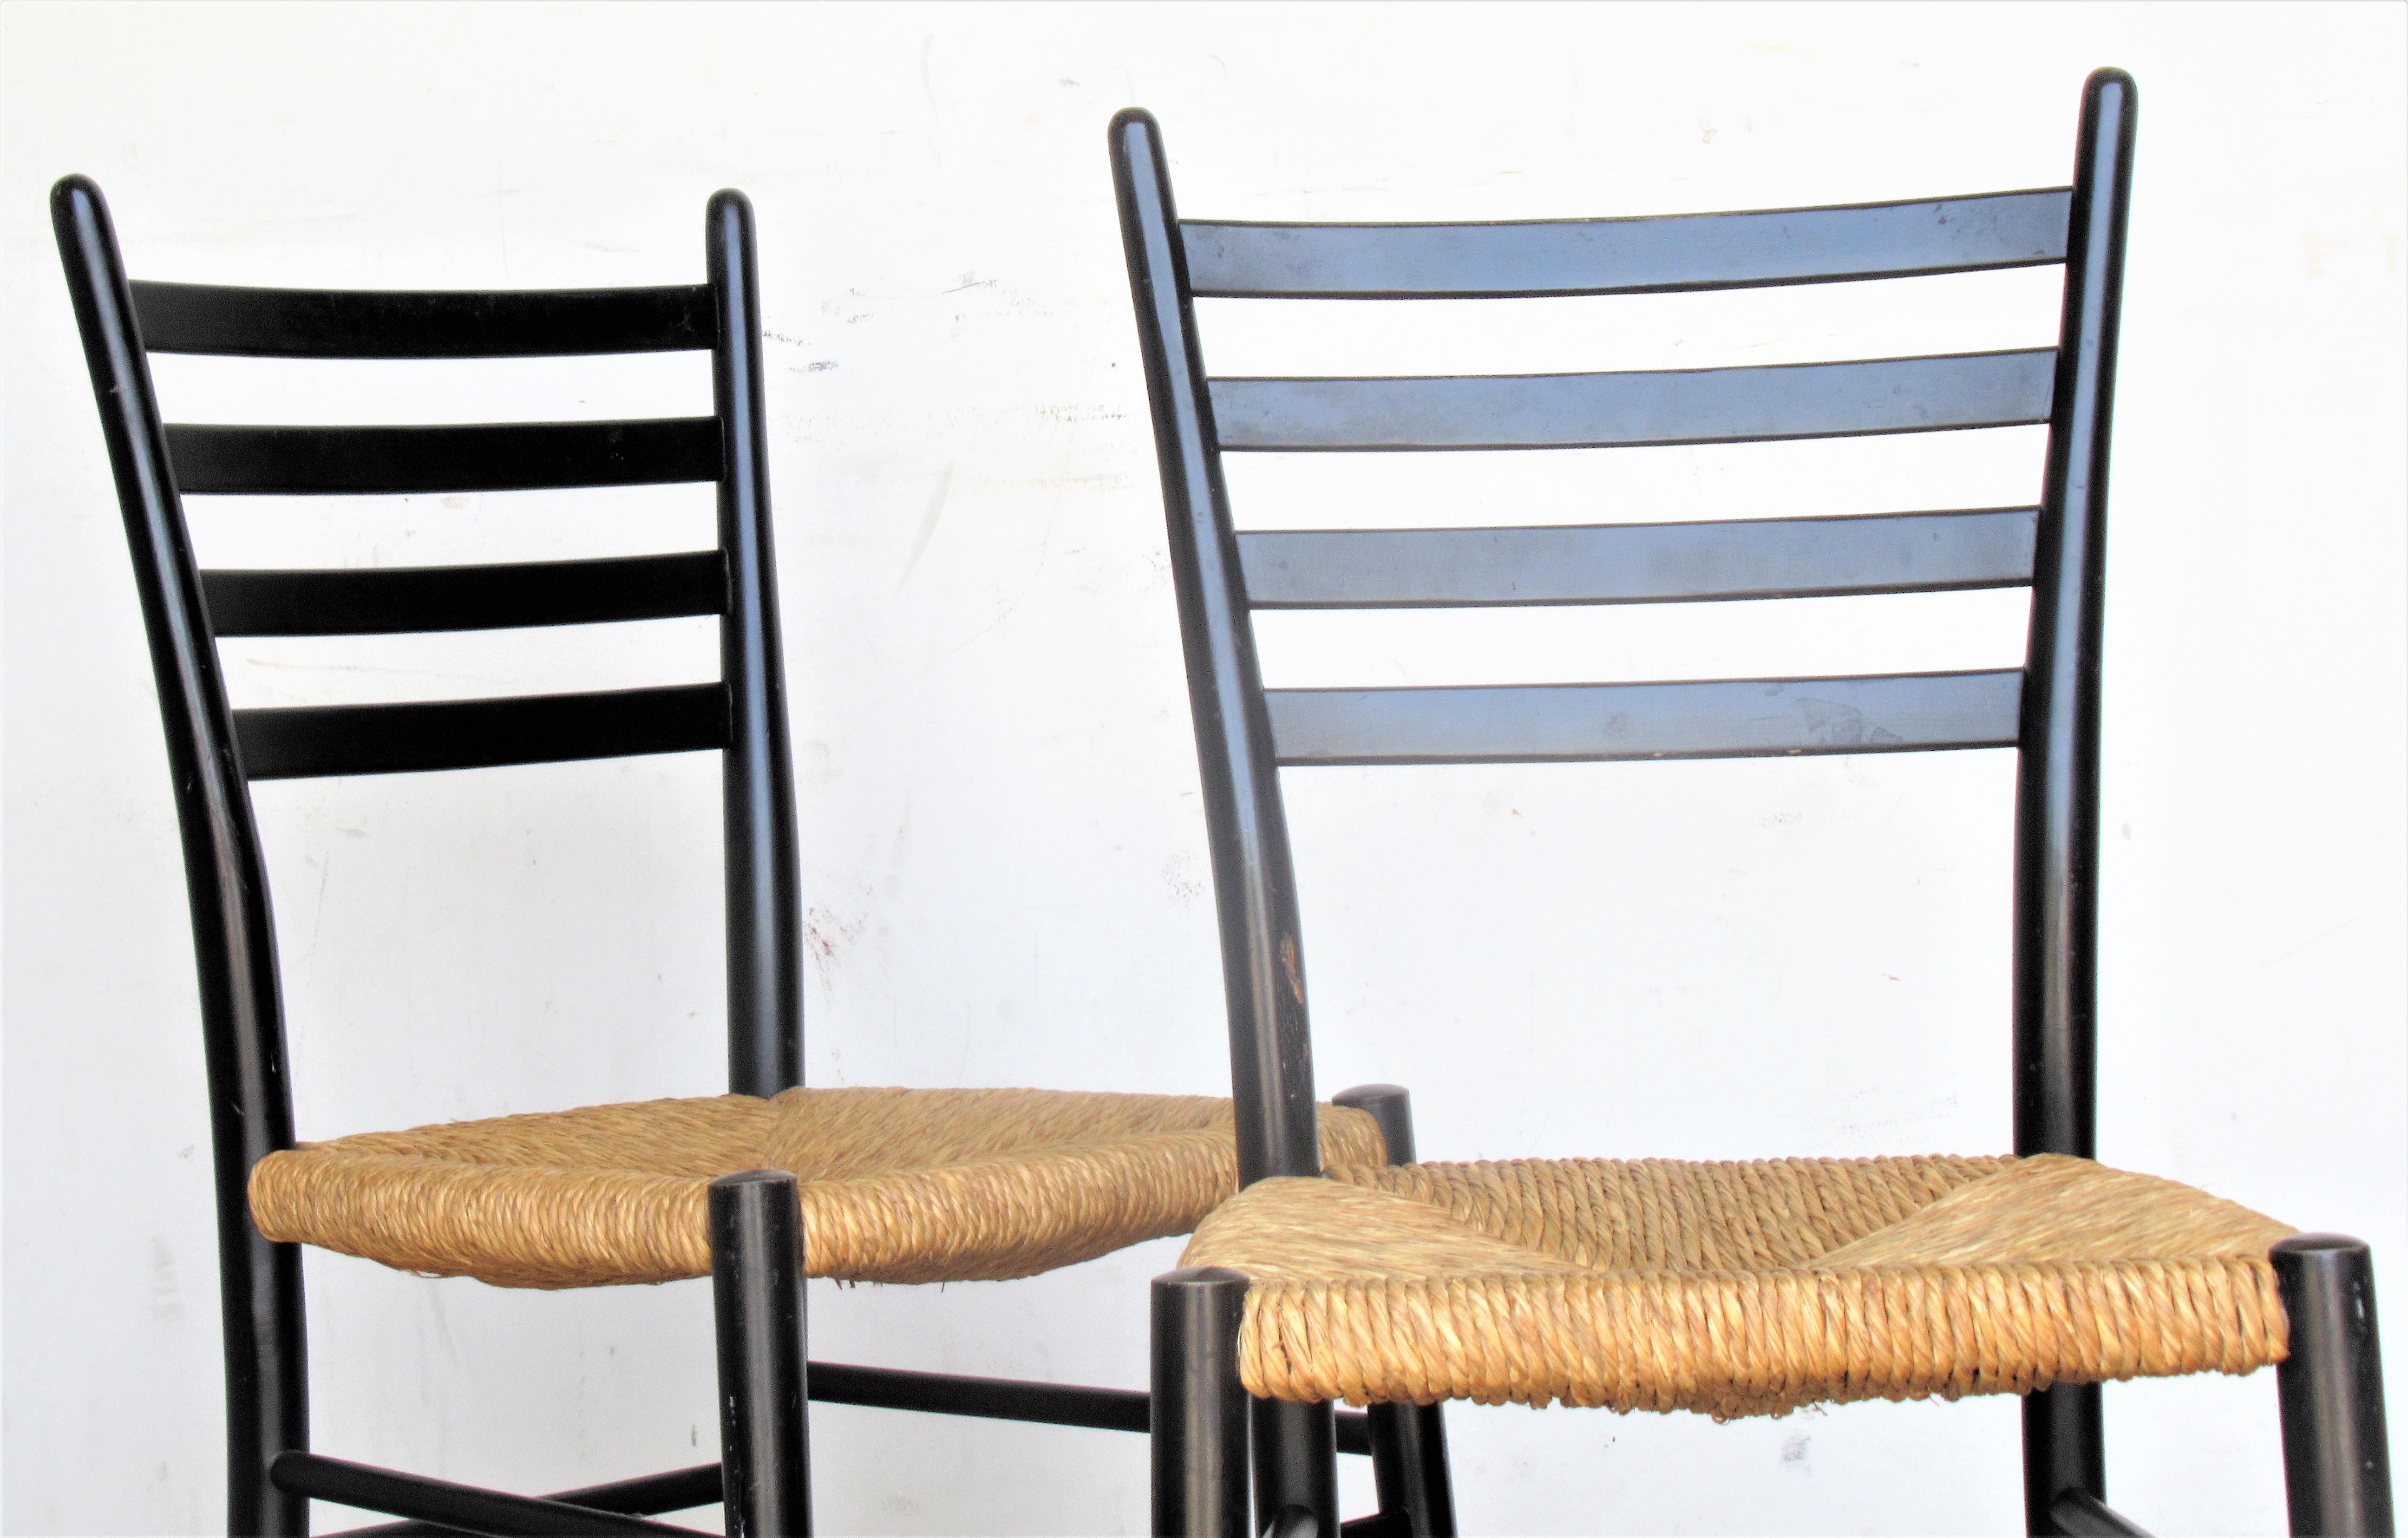 A pair of 1950's Italian modernist ladderback chairs in the style of gio Ponti, with the original woven natural rush seats and black lacquered factory finish. Look at all pictures and read condition report in comment section *****These chairs can be